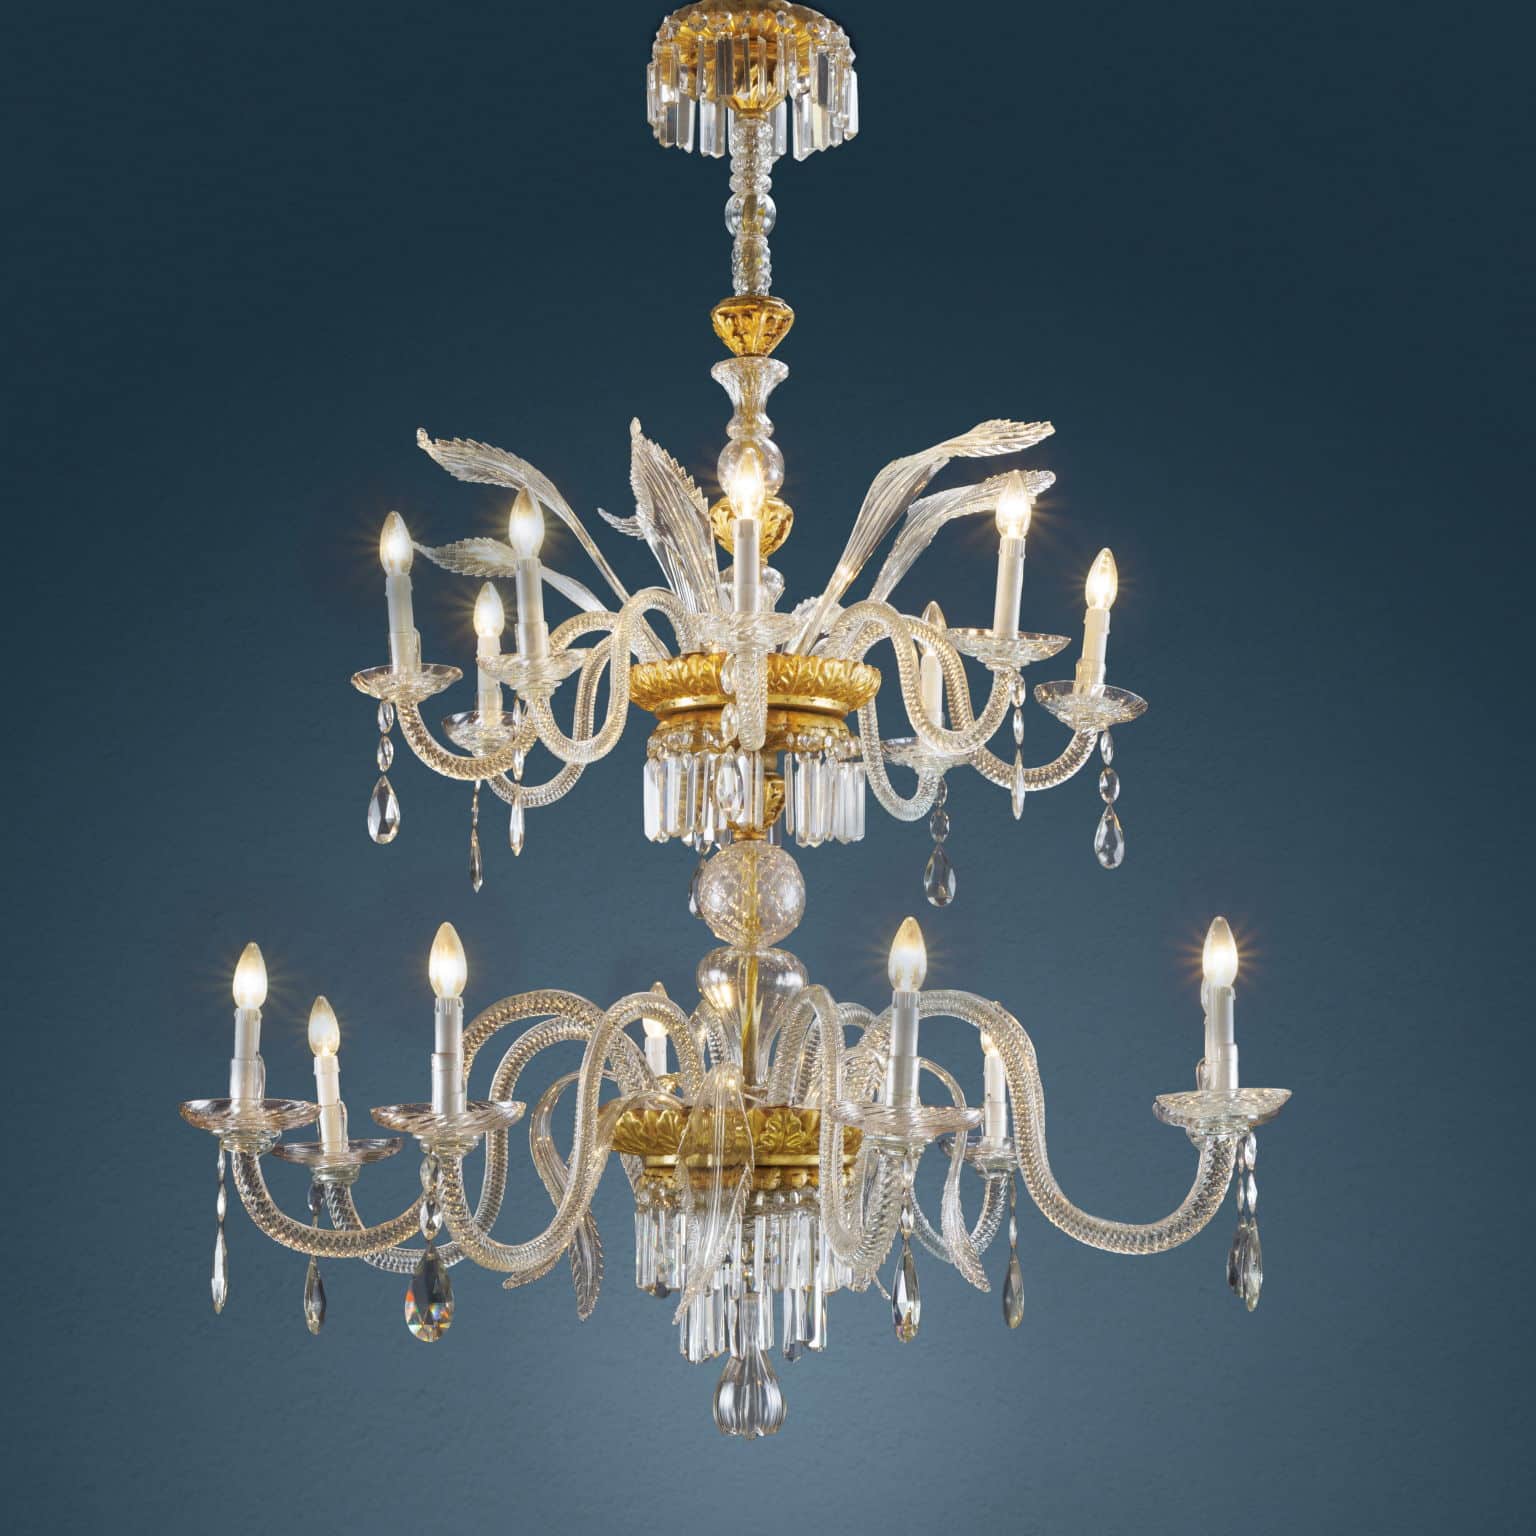 Gilded Wood and Crystal Chandelier.  Florence, early XIX century